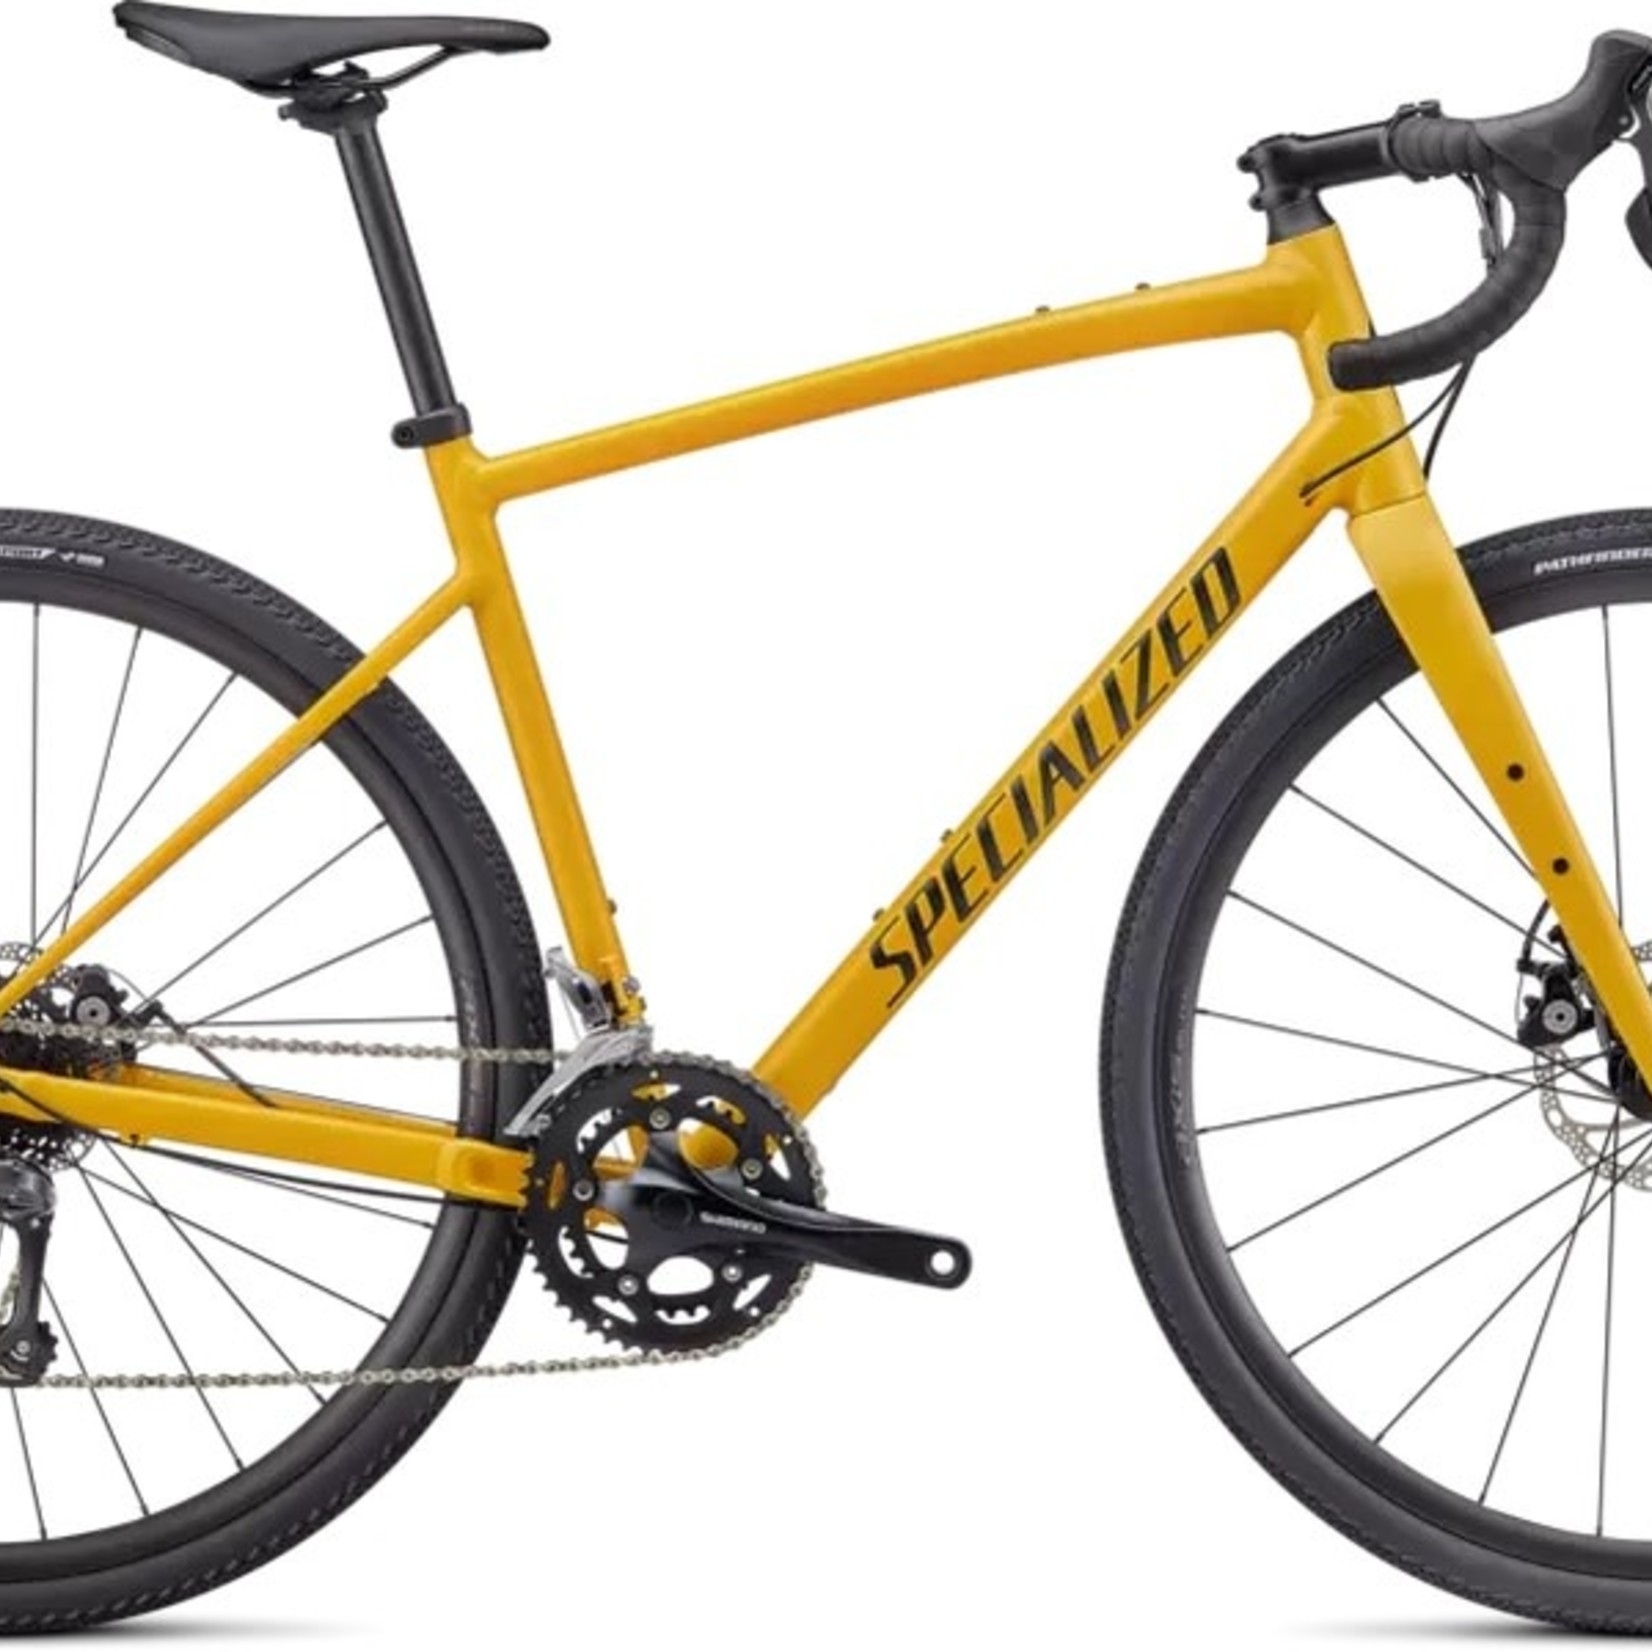 Specialized '22 SPECIALIZED, Diverge E5 Satin Brassy Yellow/Black/Chrome/Clean